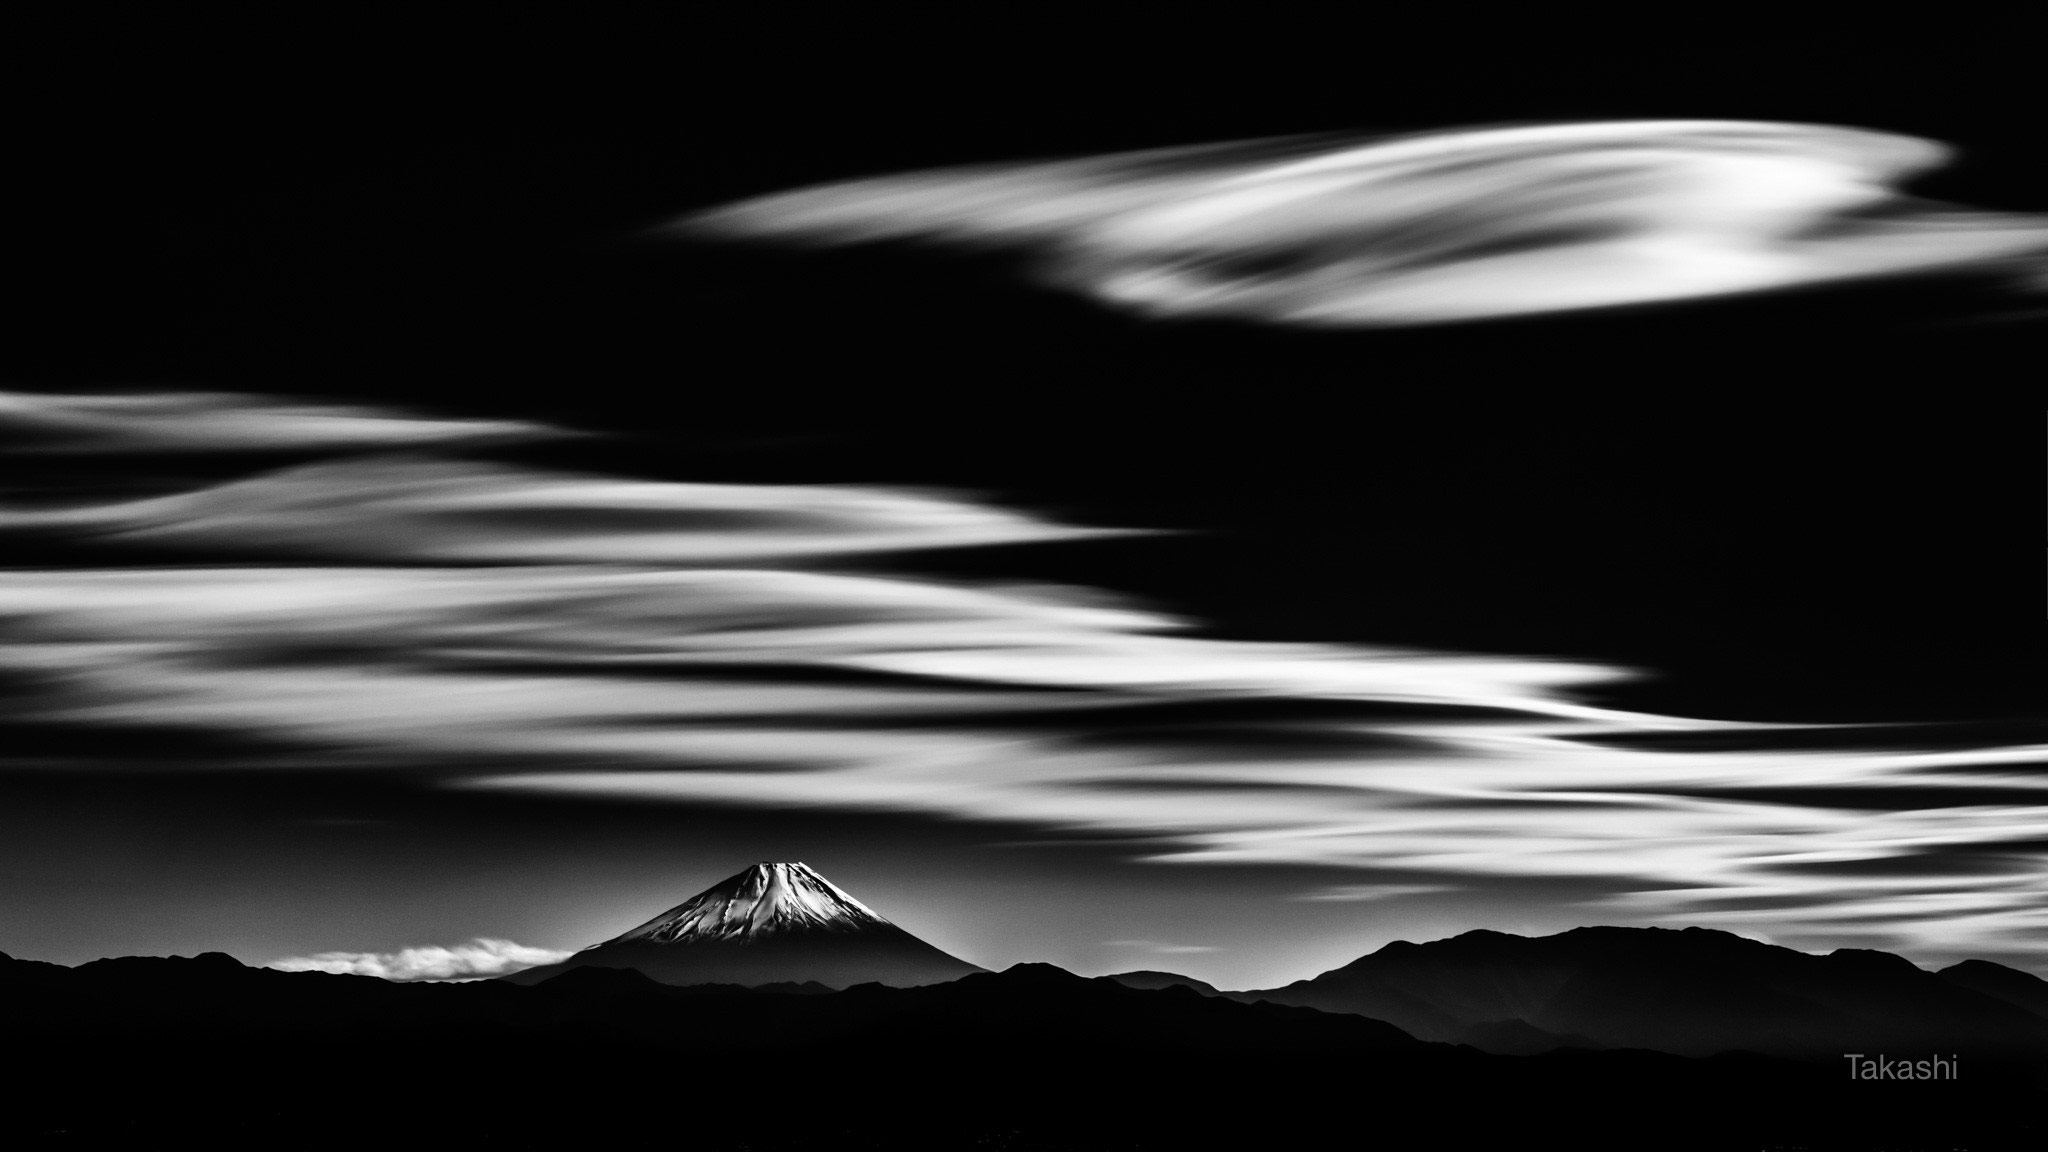 A Planet With Mt. Fuji, Yamanashi, Japan, © Takashi, Tokyo, Japan, Highly Honored Landscape, Nature's Best Photography Asia